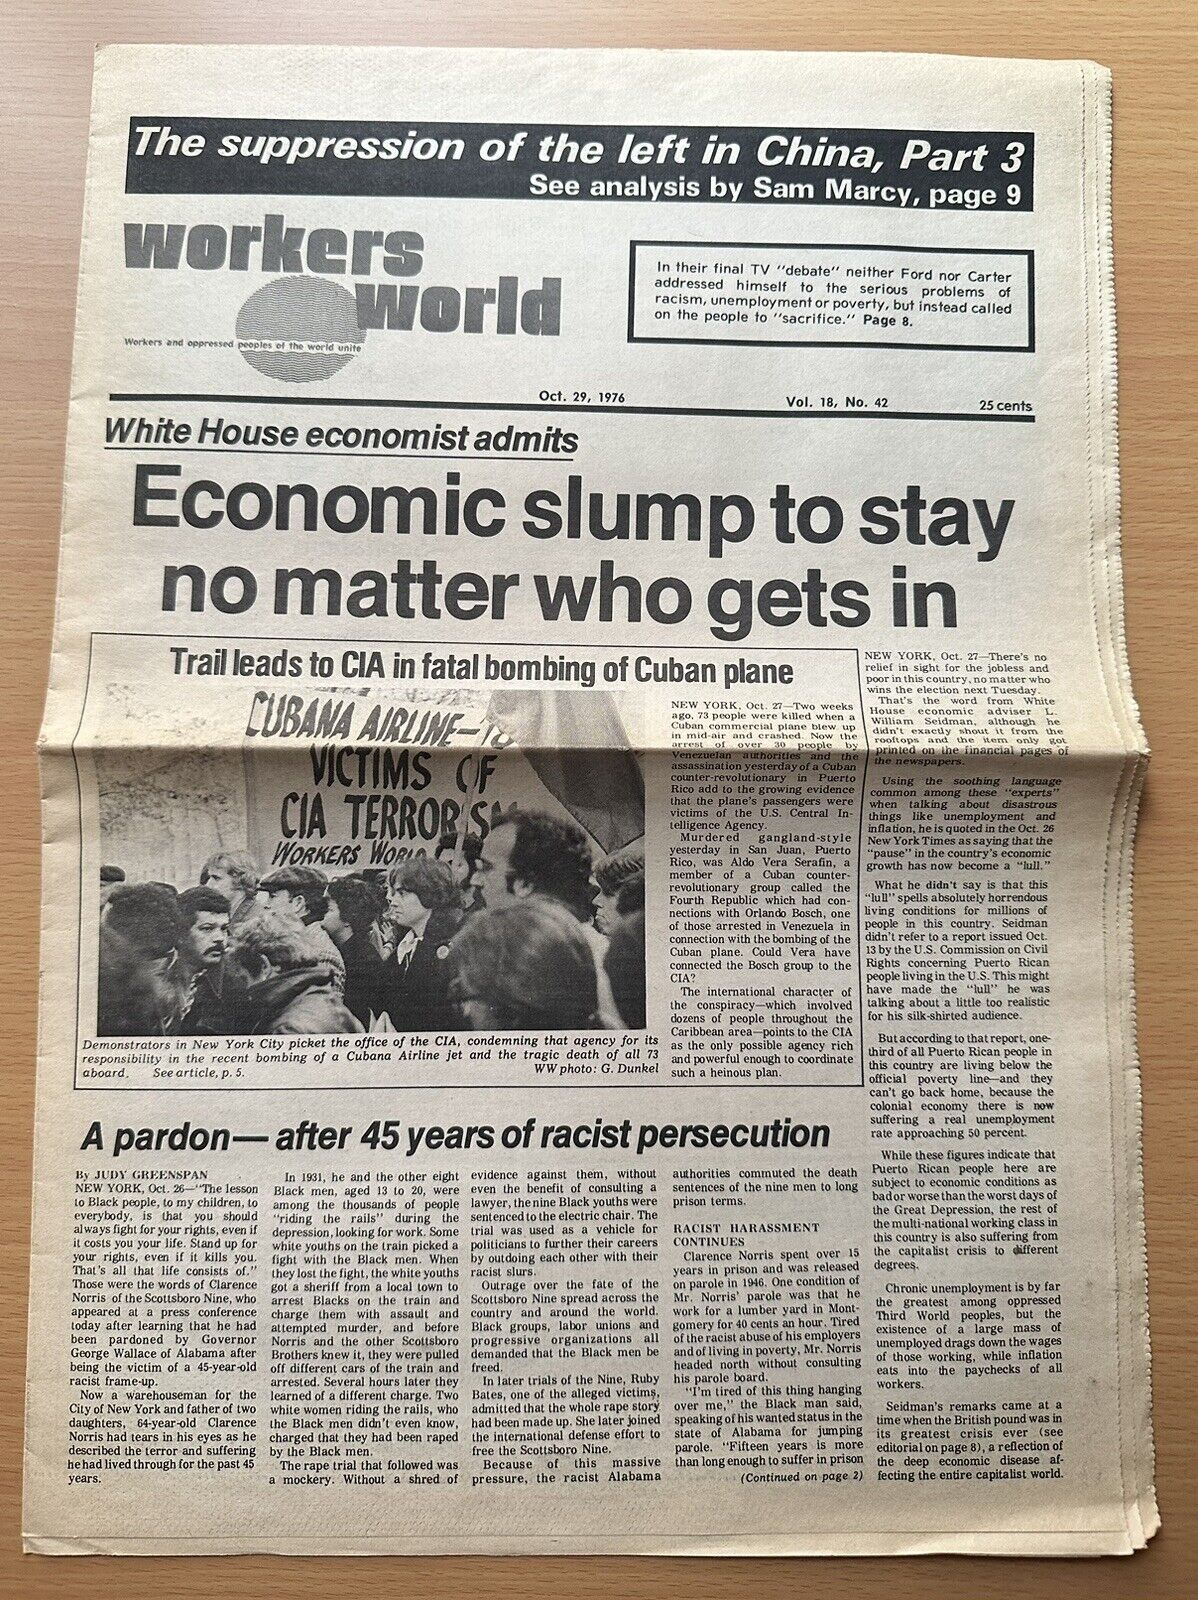 Workers World Newspaper Workers World Party (WWP) Communist Newspaper 1976￼